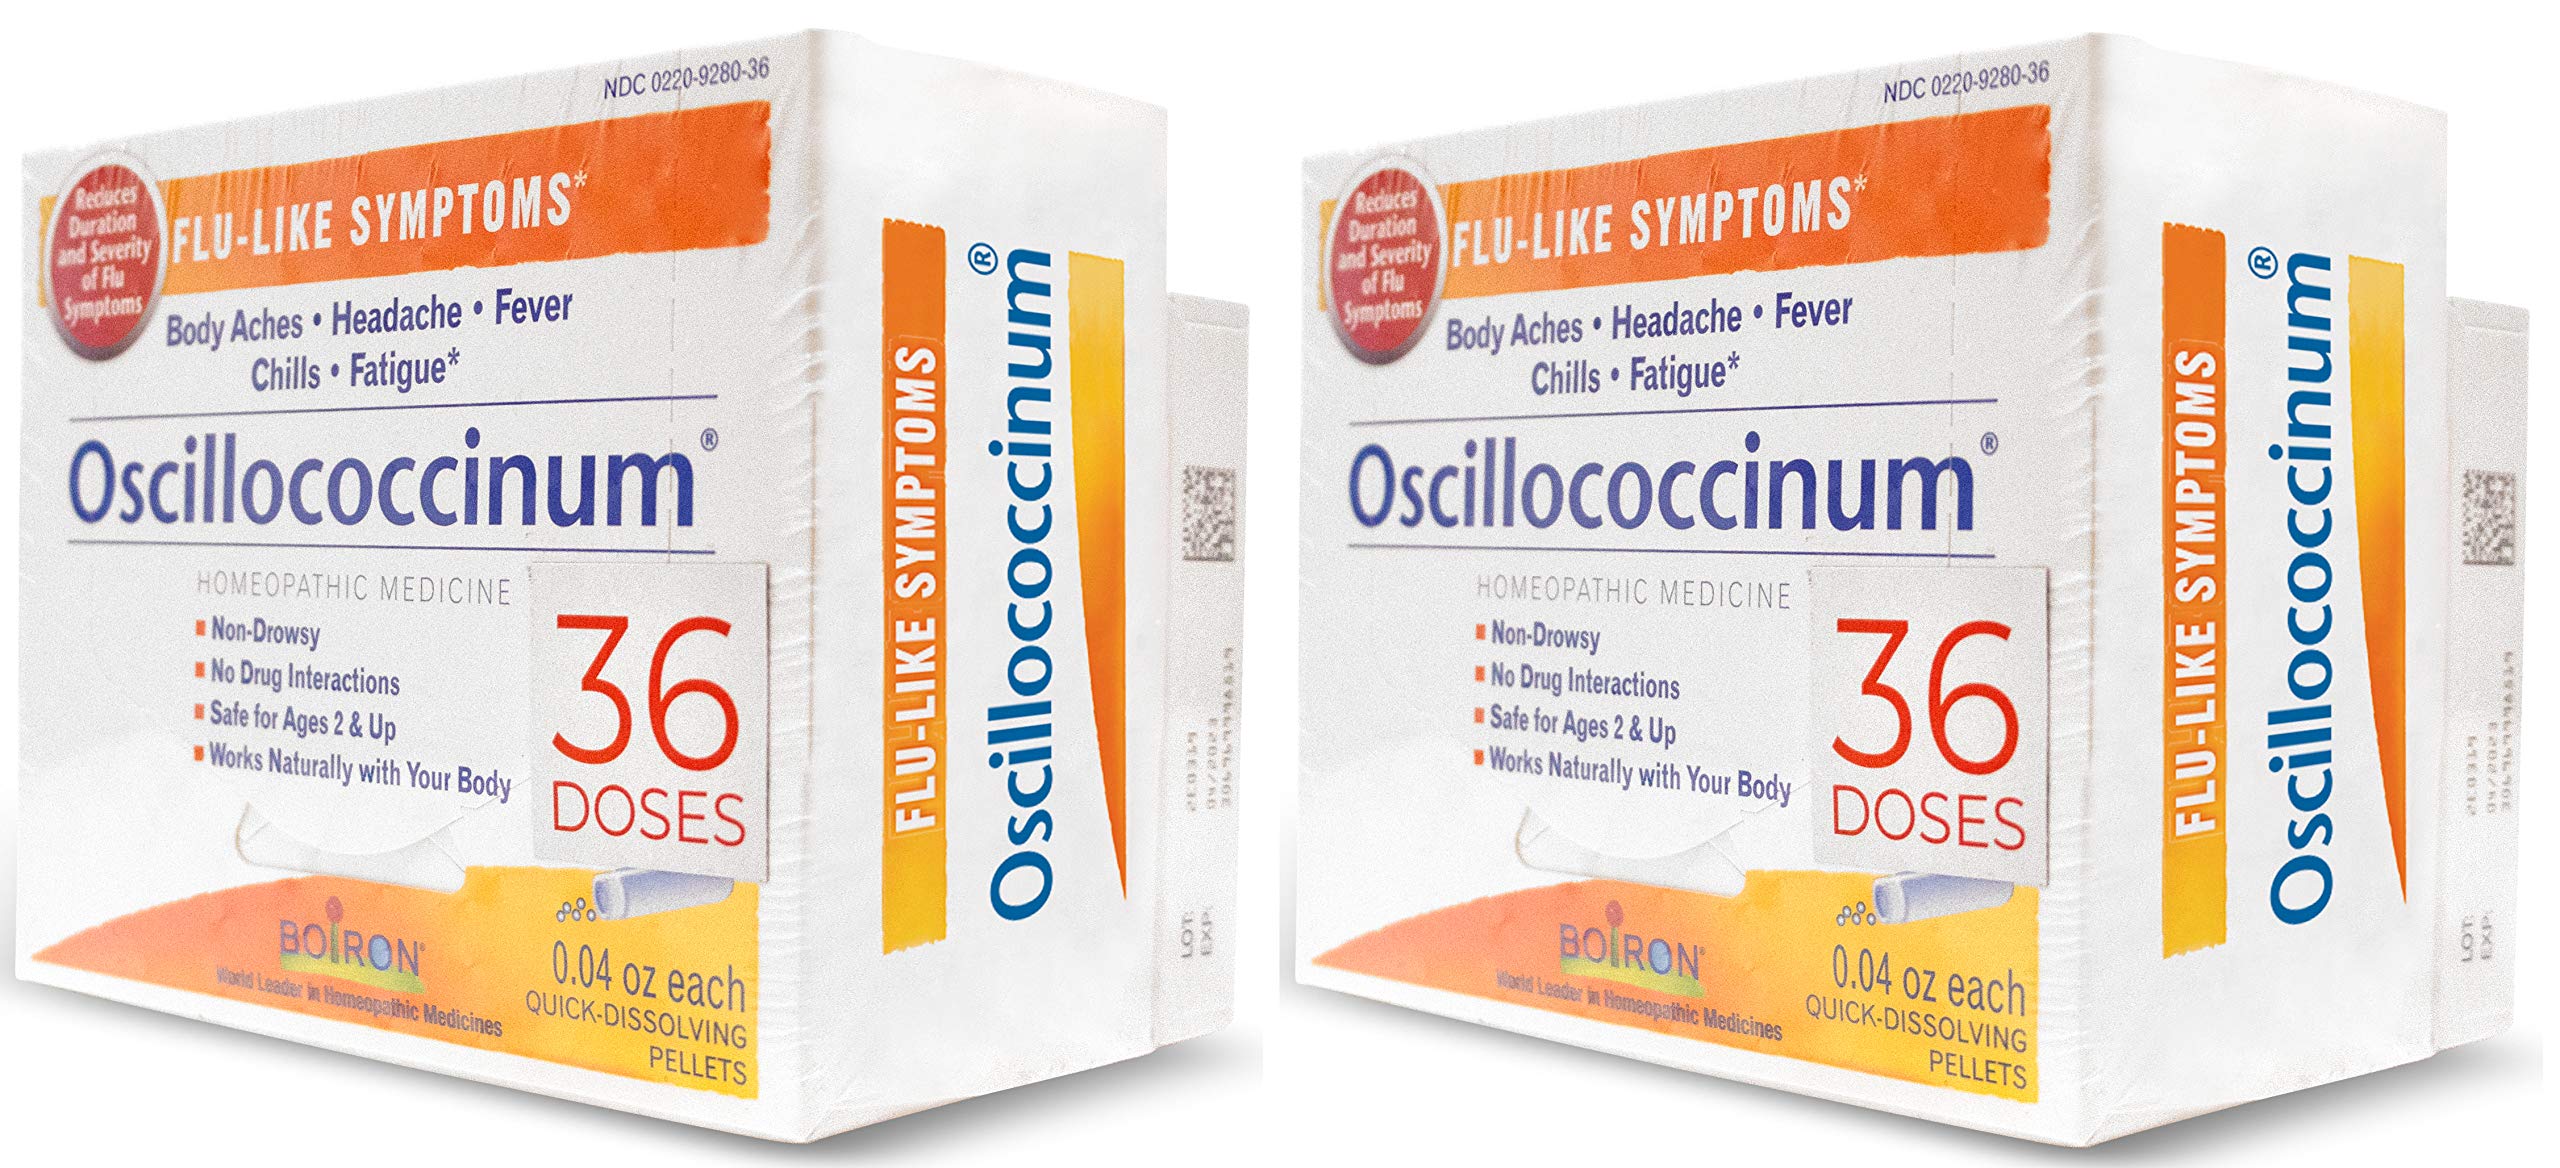 Boiron Oscillococcinum 72 Doses Homeopathic Medicine for Flu-Like Symptoms (2 Packs of 36)